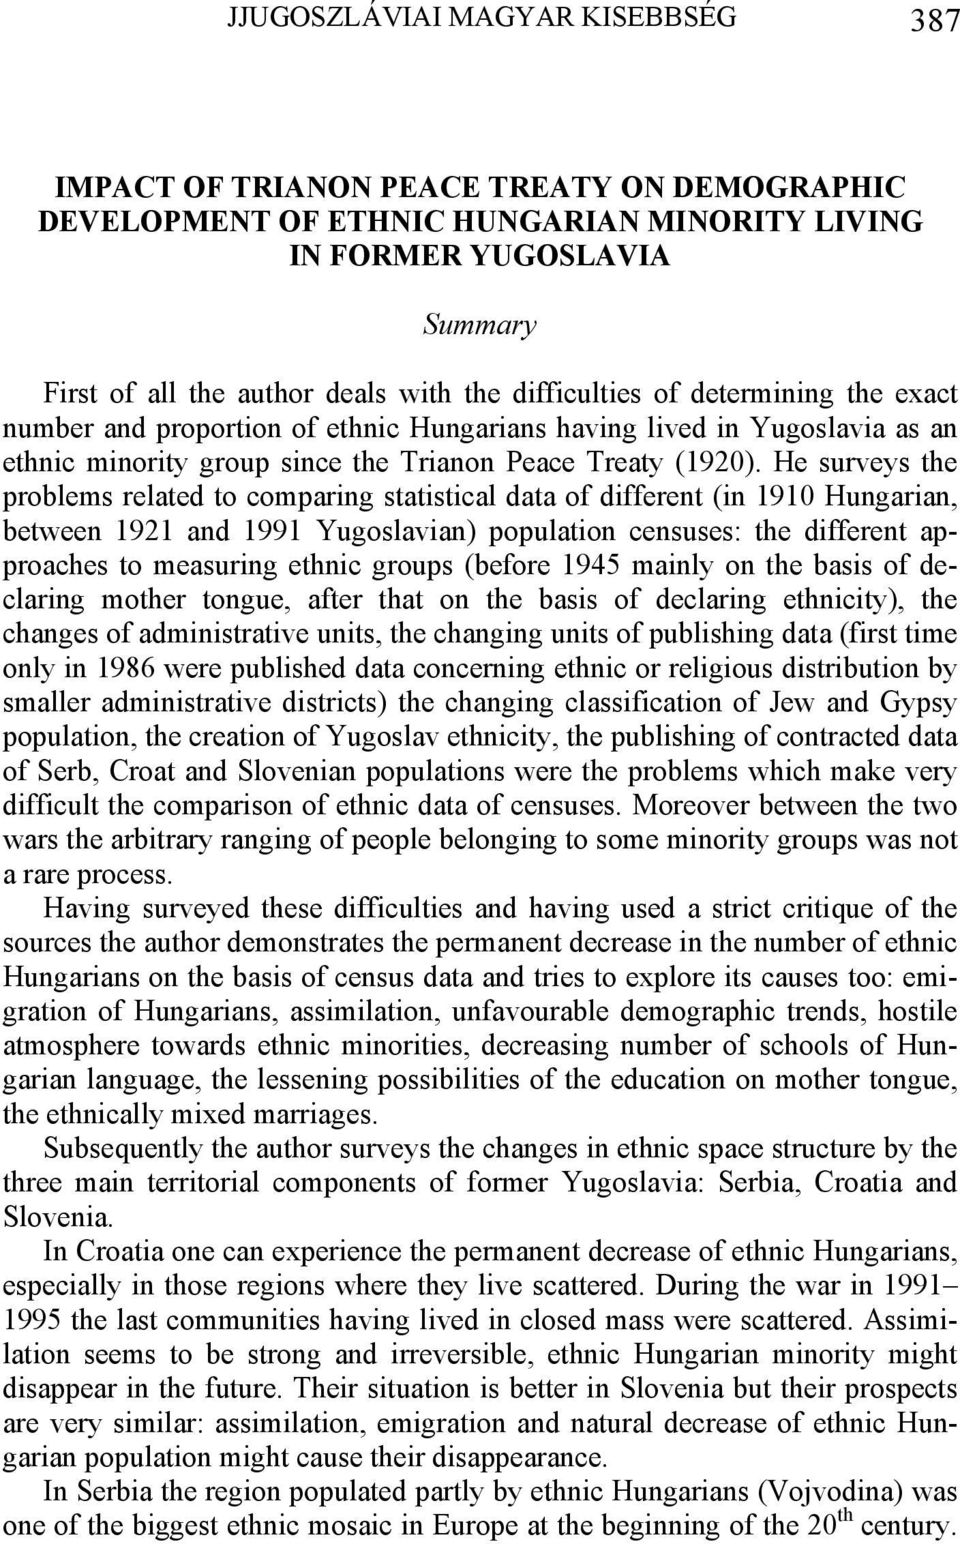 He surveys the problems related to comparing statistical data of different (in 1910 Hungarian, between 1921 and 1991 Yugoslavian) population censuses: the different approaches to measuring ethnic